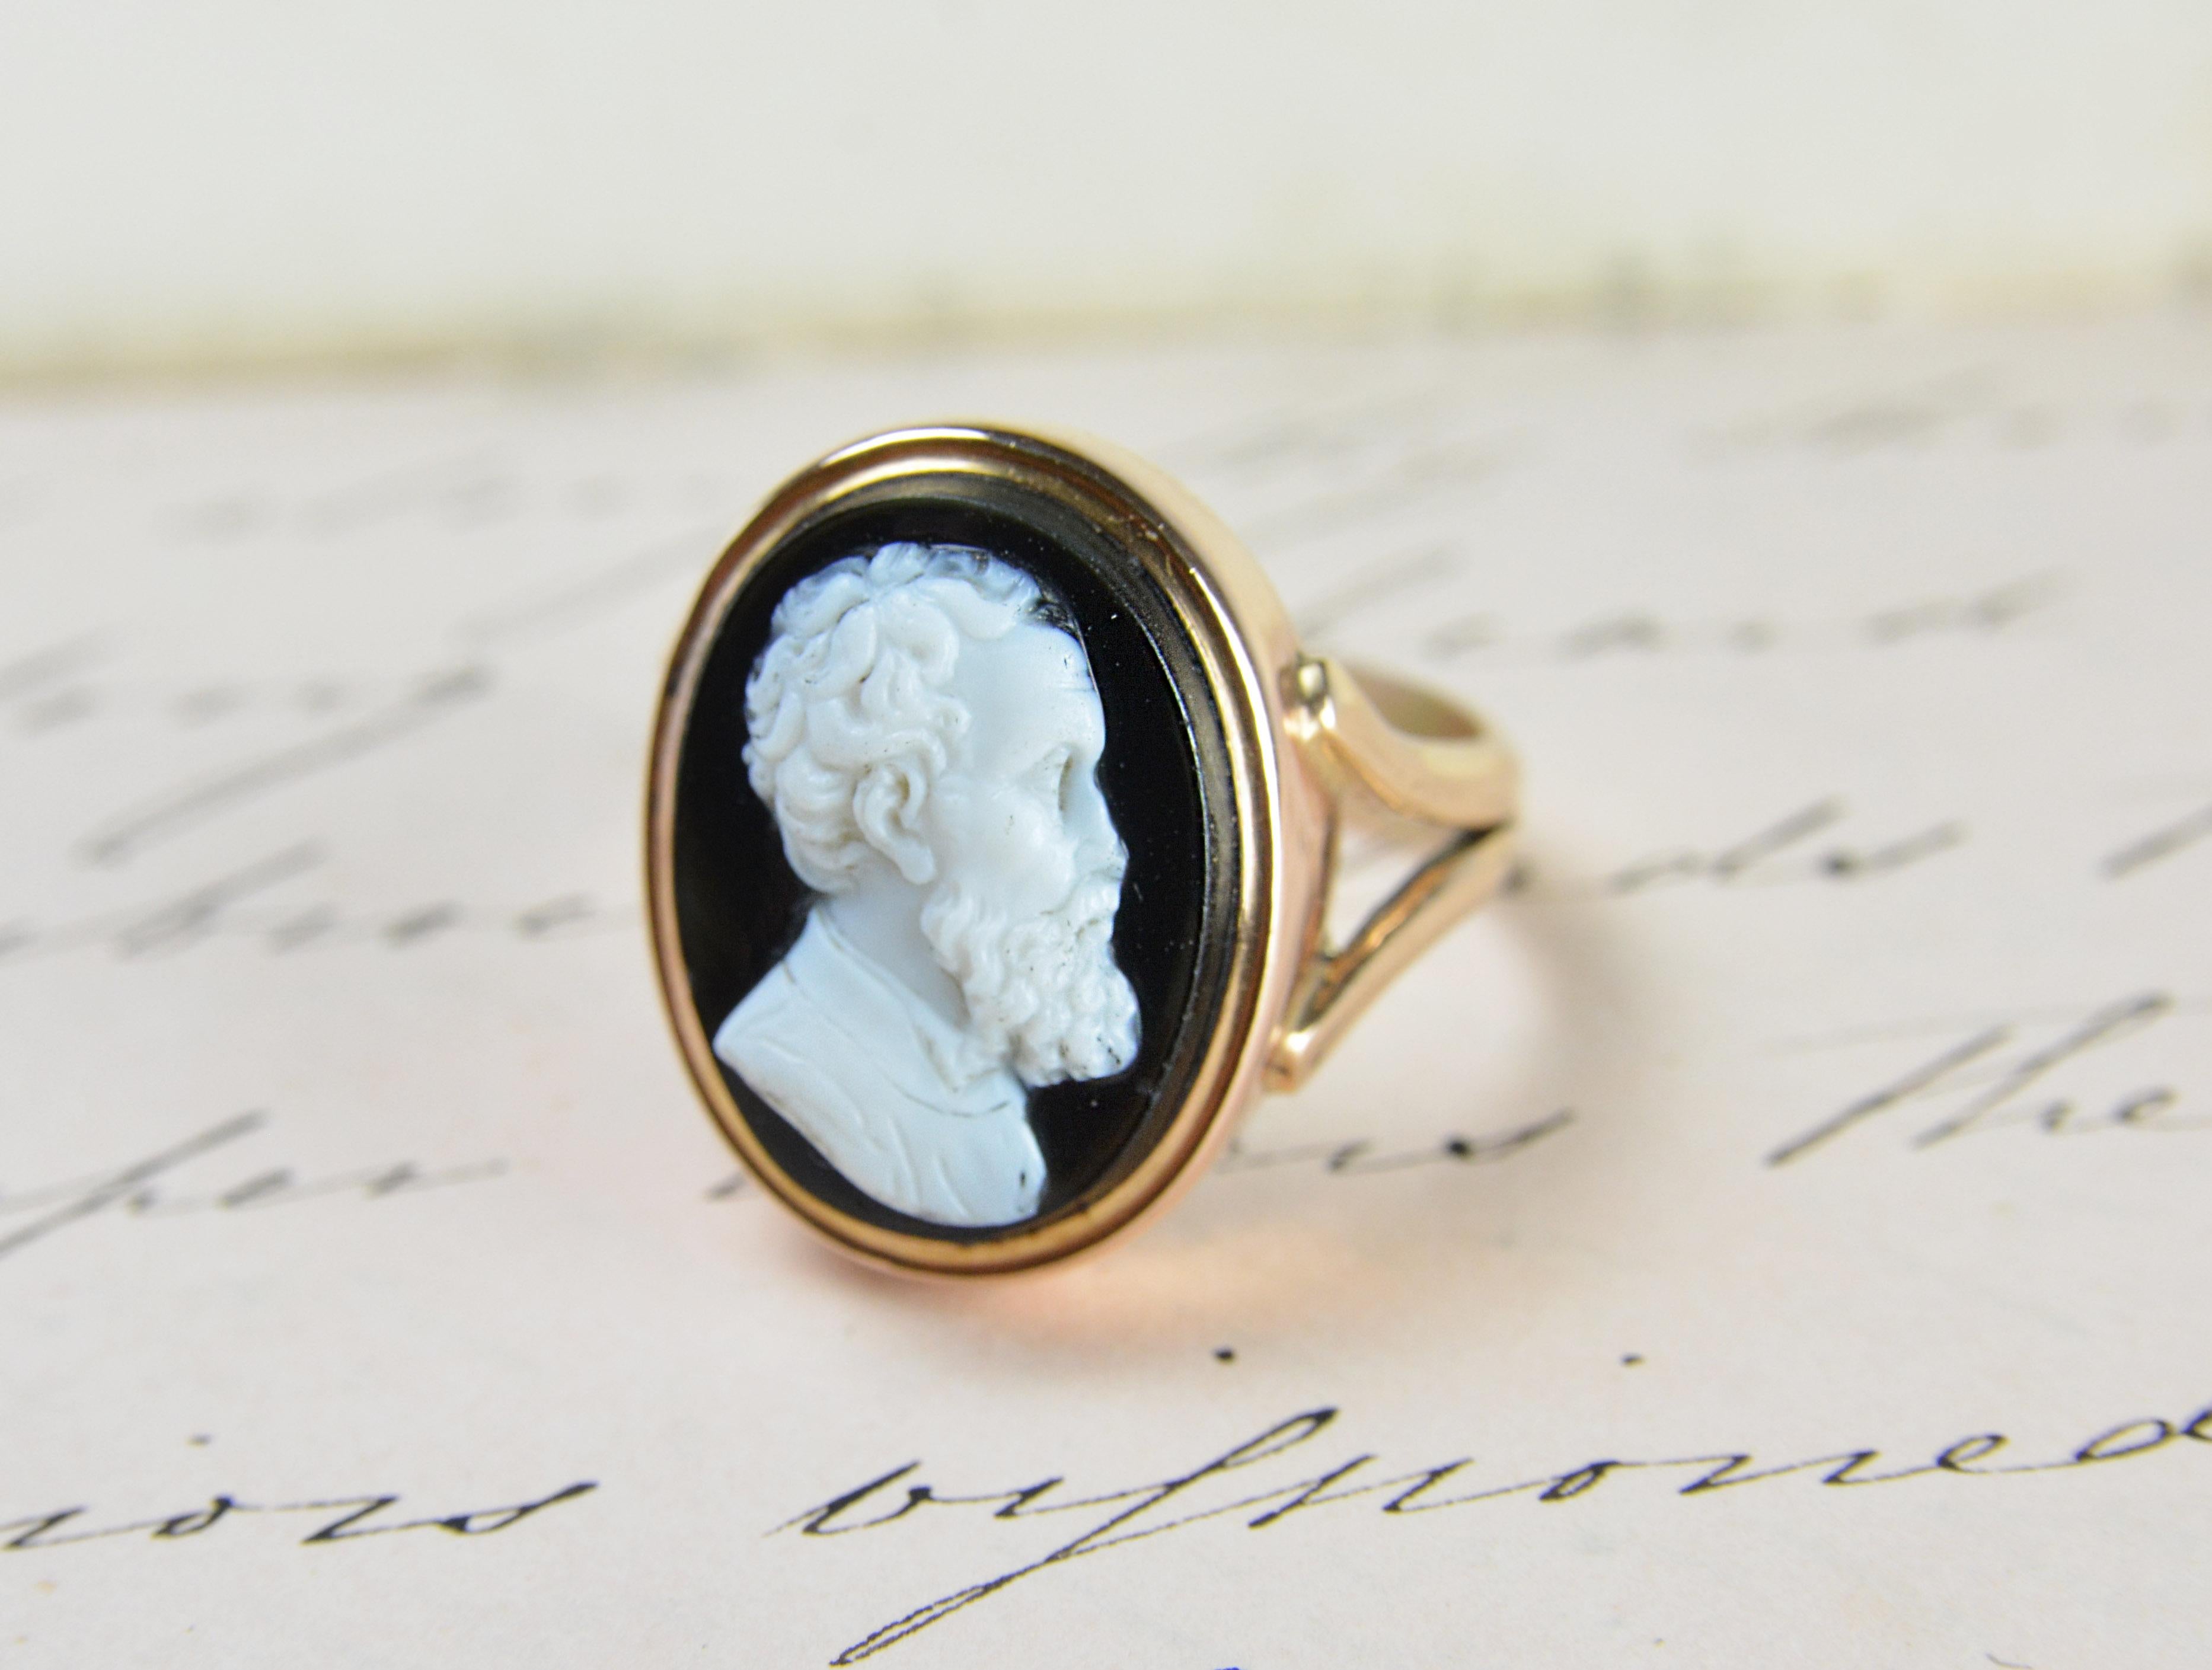 An extremely well carved agate Cameo depicting a Classical Greek Philosopher, originally crafted in the late Georgian Era, set in 9ct Rose Gold. The agate Cameo consist of two different coloured strata of stone the top white layer is carved and